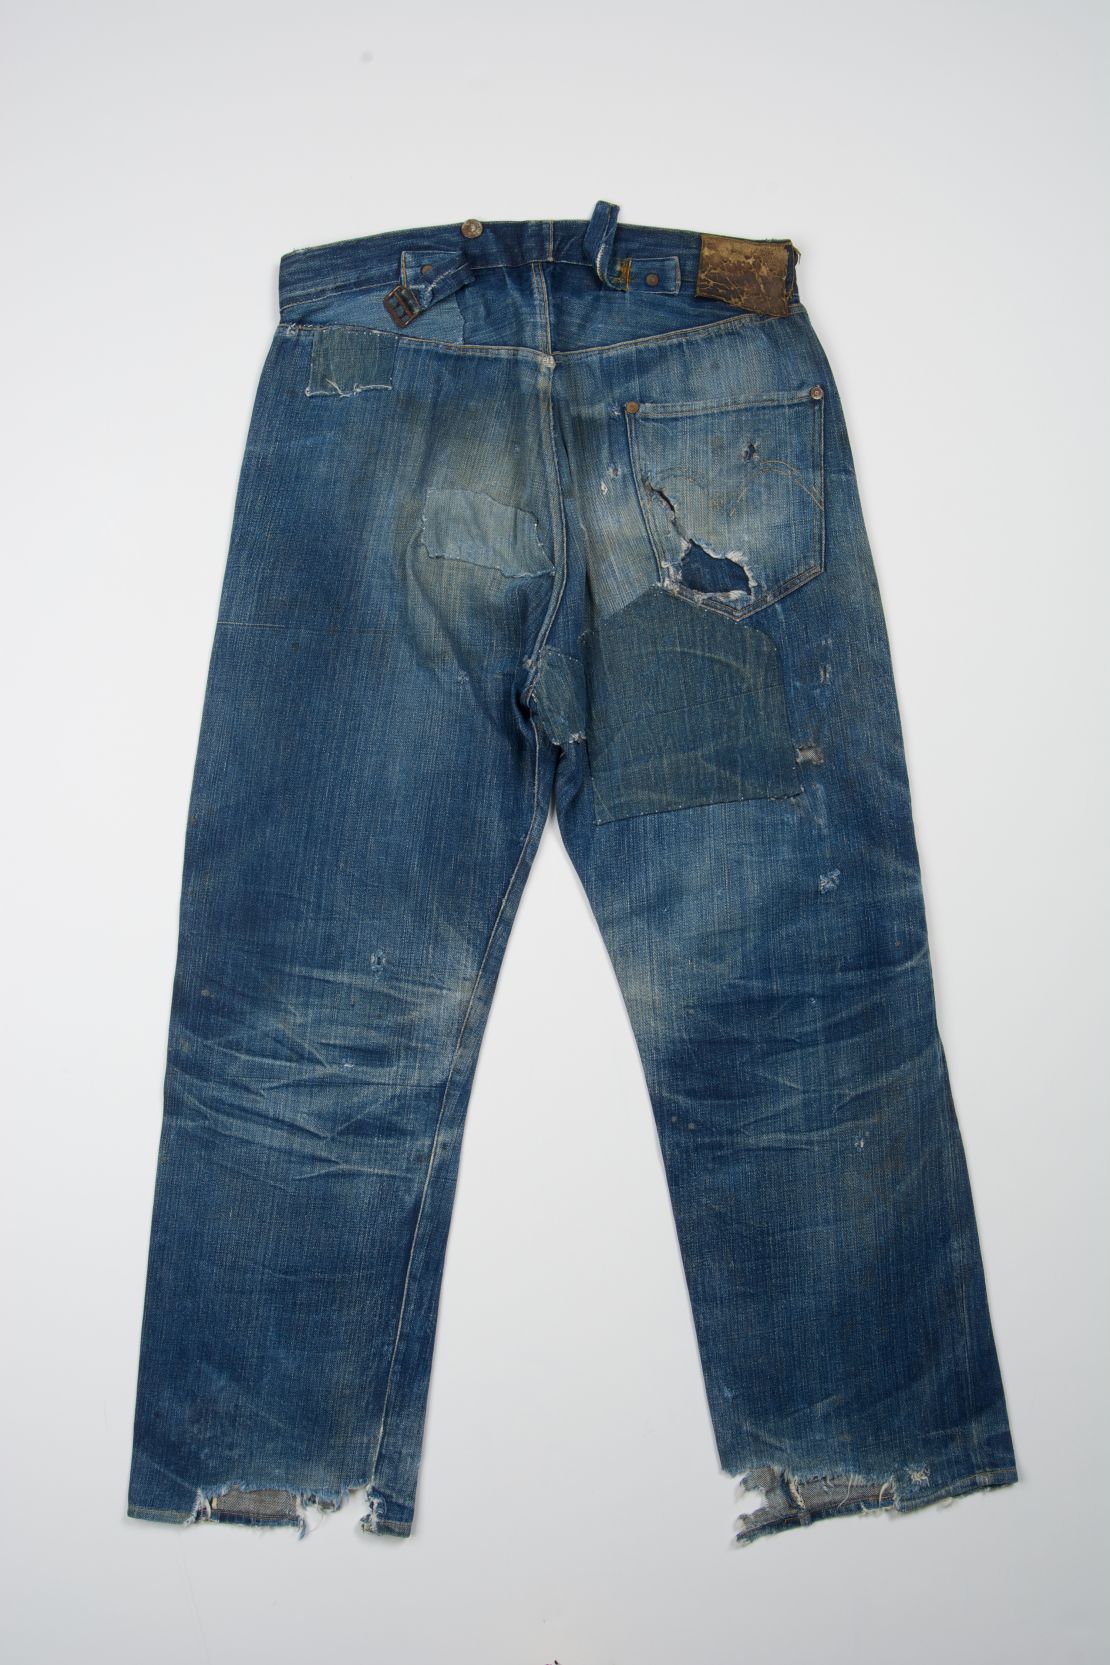 A pair of Levi's 501 jeans.